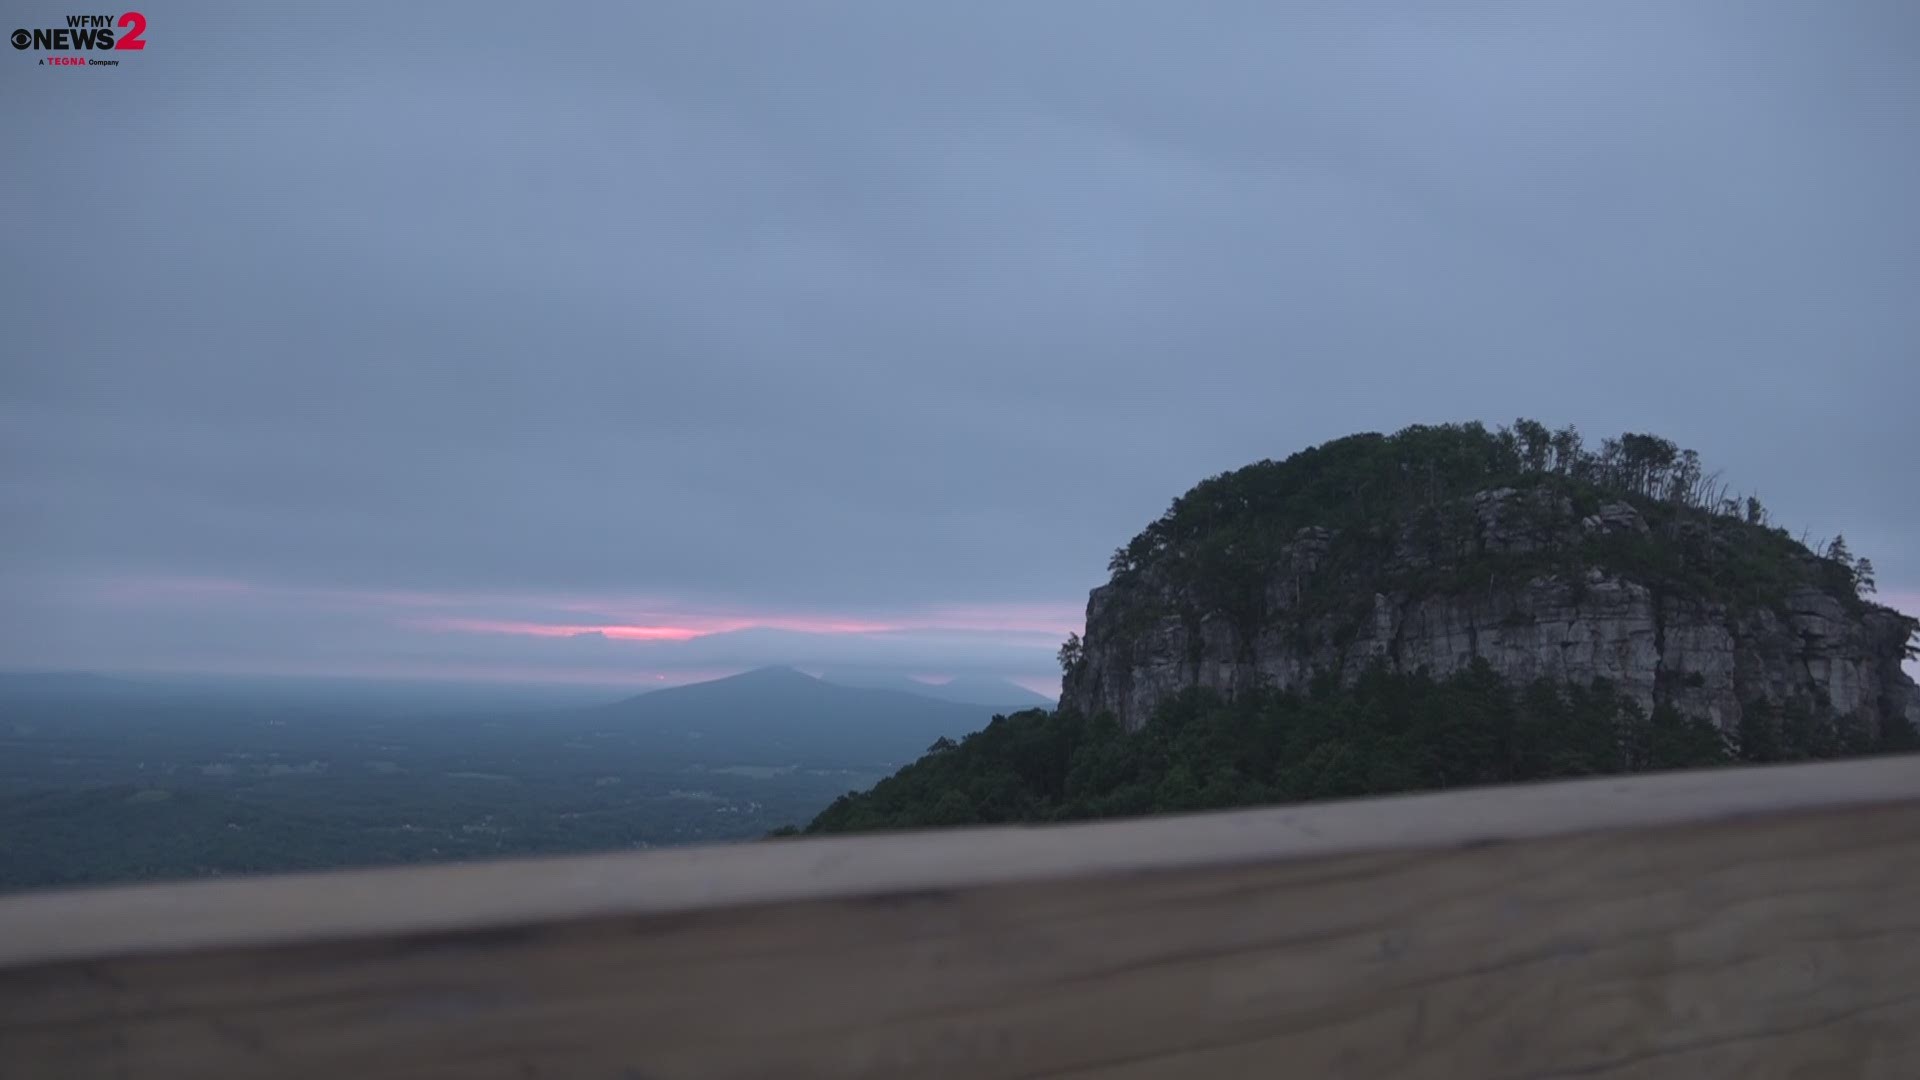 This July, Pilot Mountain State Park is celebrating its 50th anniversary with an event for the entire family.